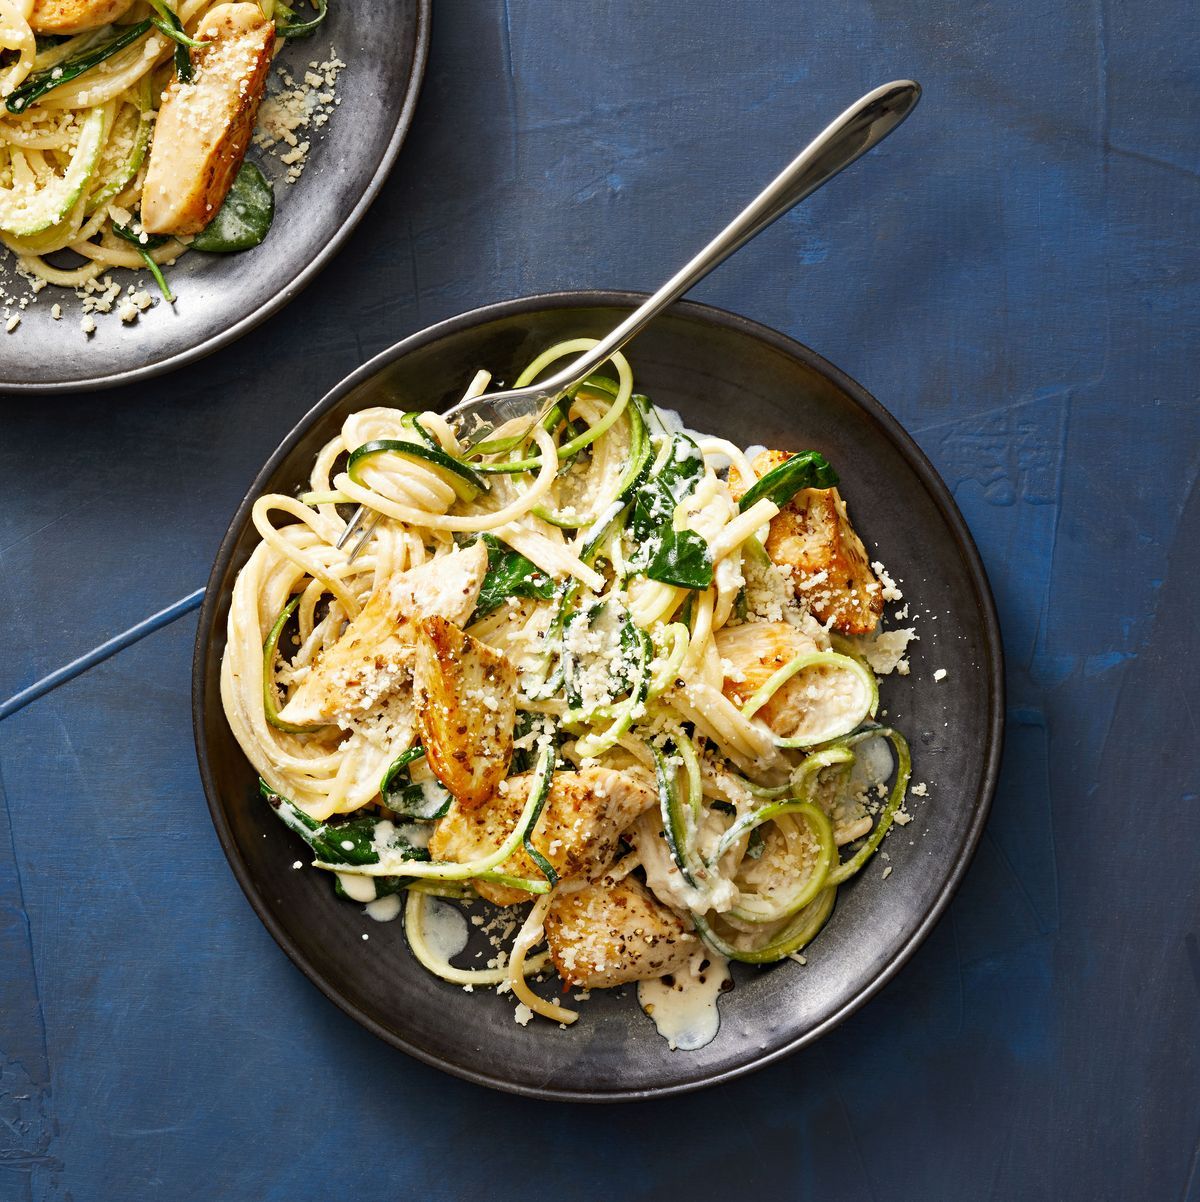 https://hips.hearstapps.com/hmg-prod/images/zucchini-noodle-recipes-creamy-chicken-zoodle-646fbaf8ce3ee.jpg